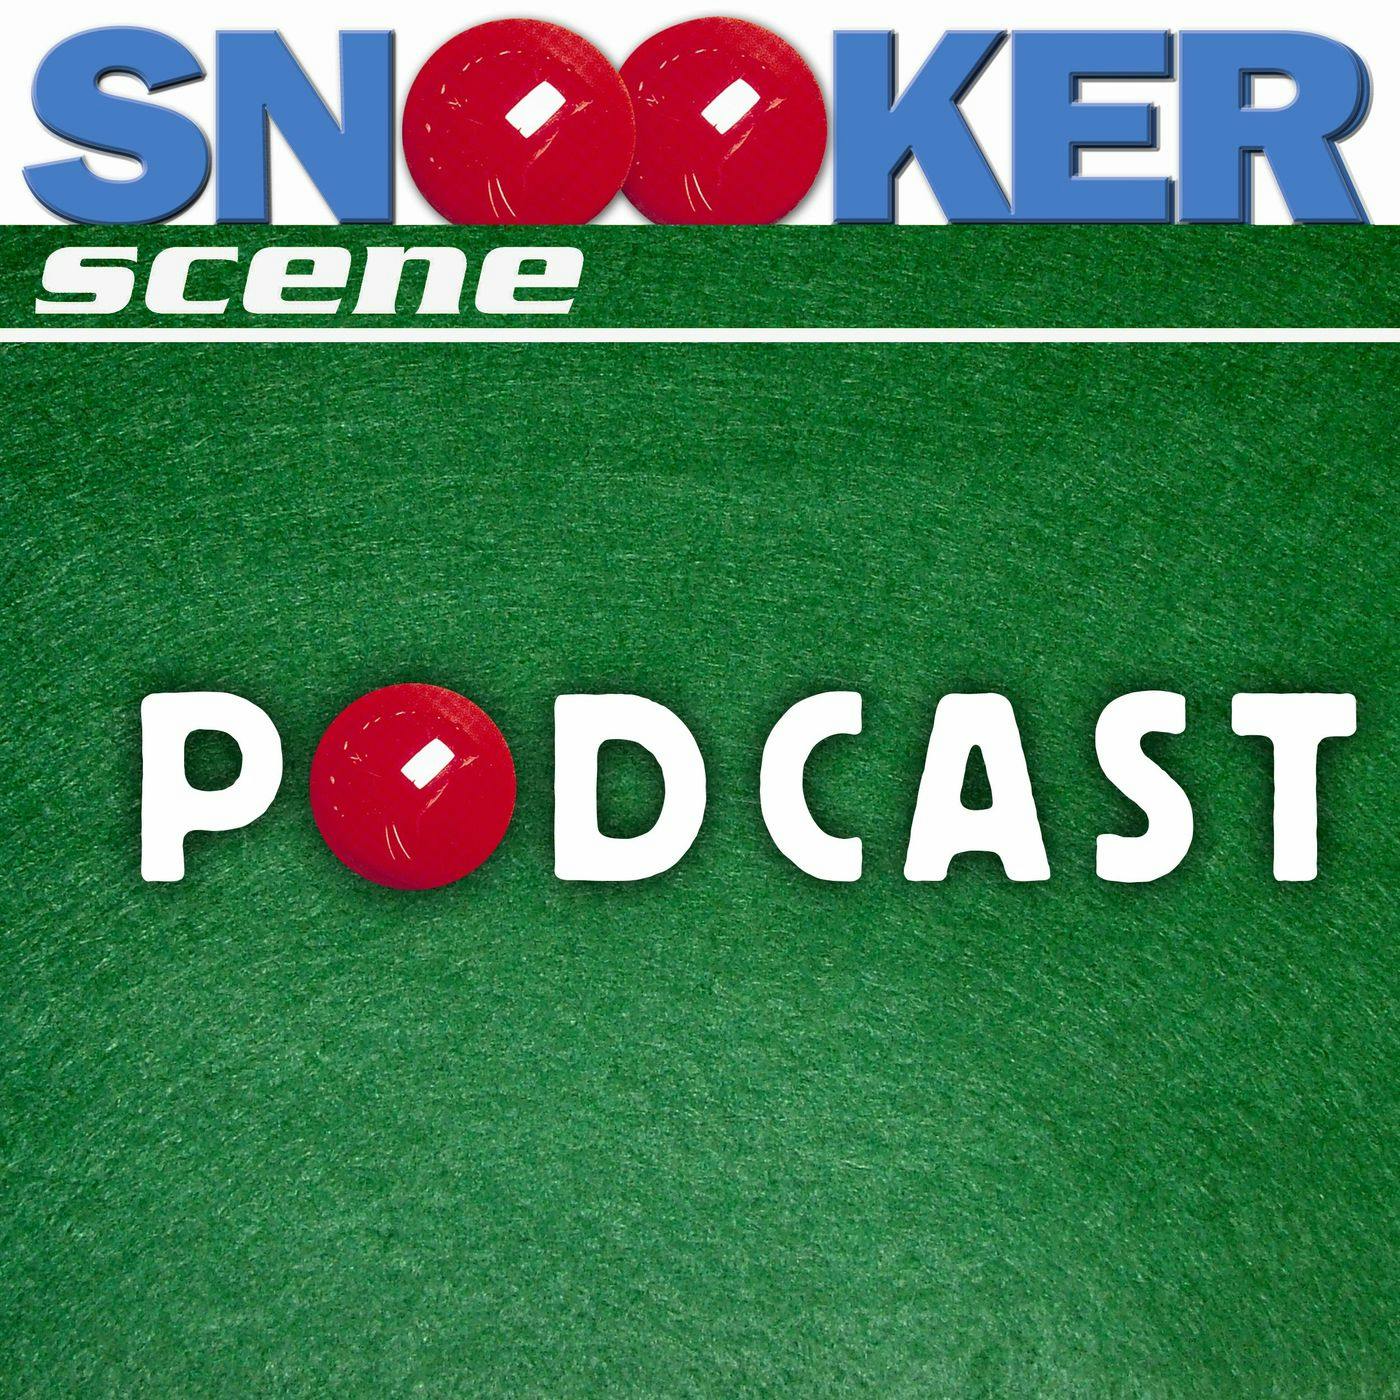 Snooker Scene Podcast episode 164 - End of series special with Fergal O'Brien